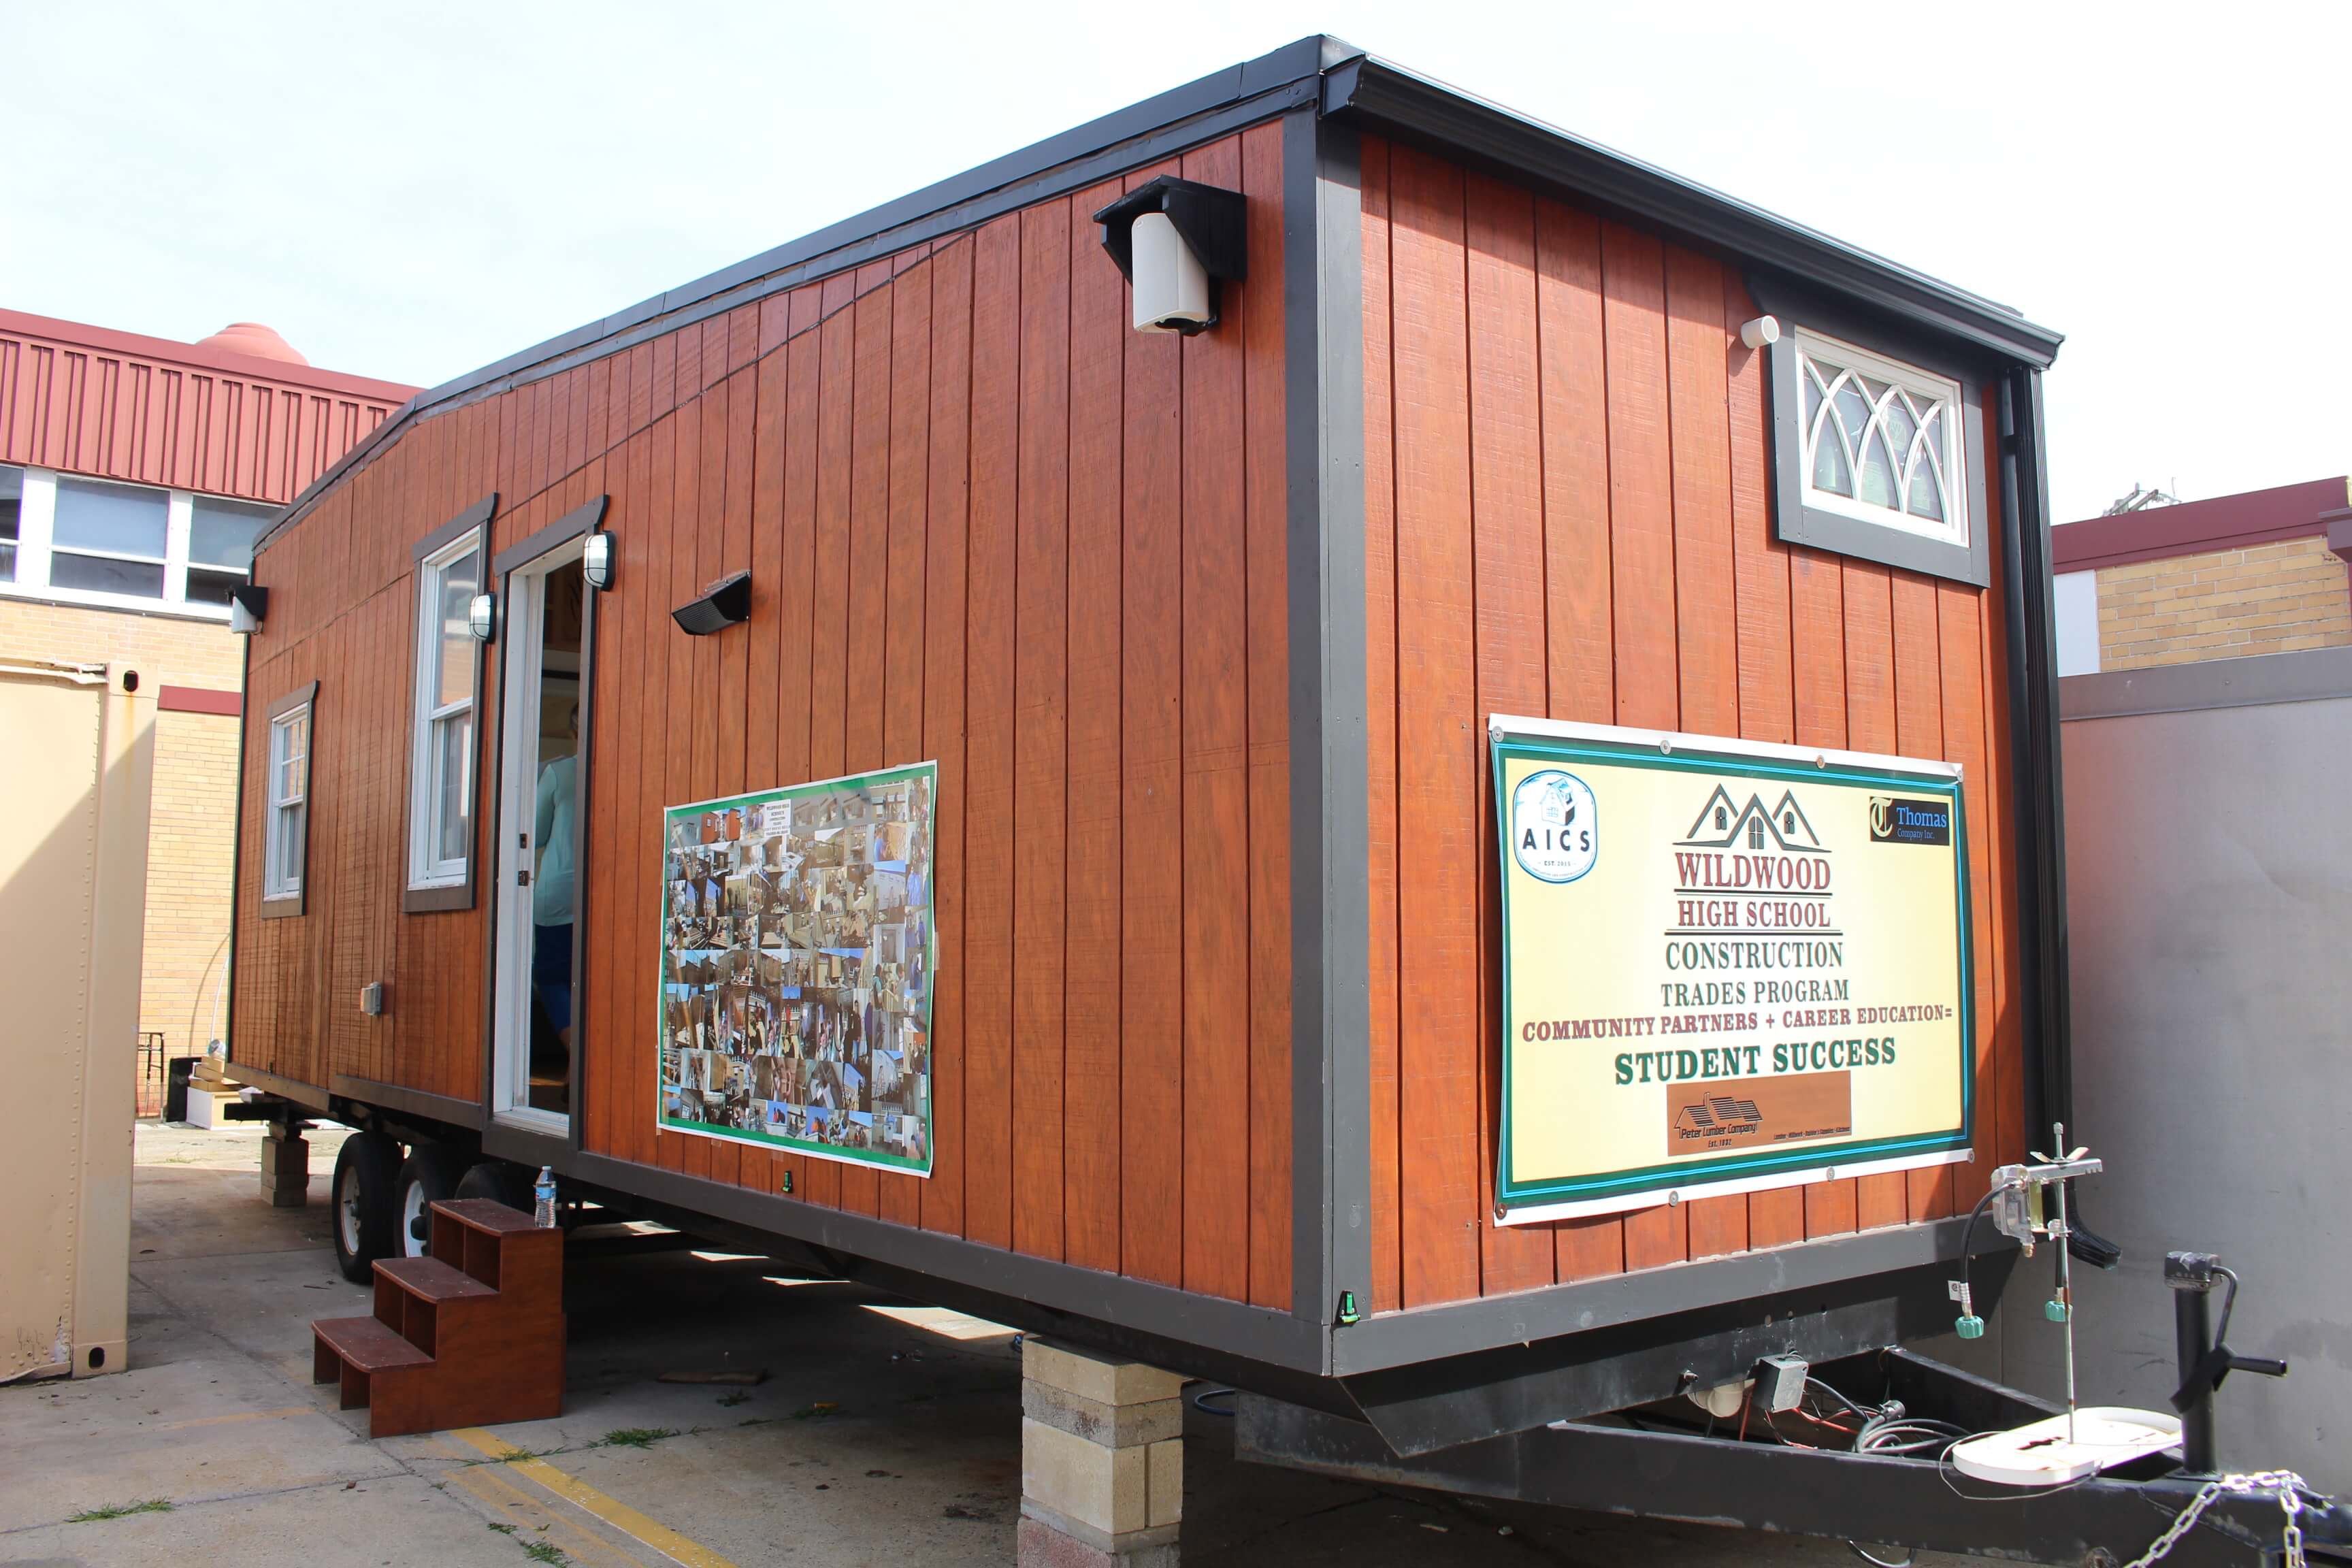 The tiny house was built by Wildwood High School students in Michael Crane’s construction trades program.